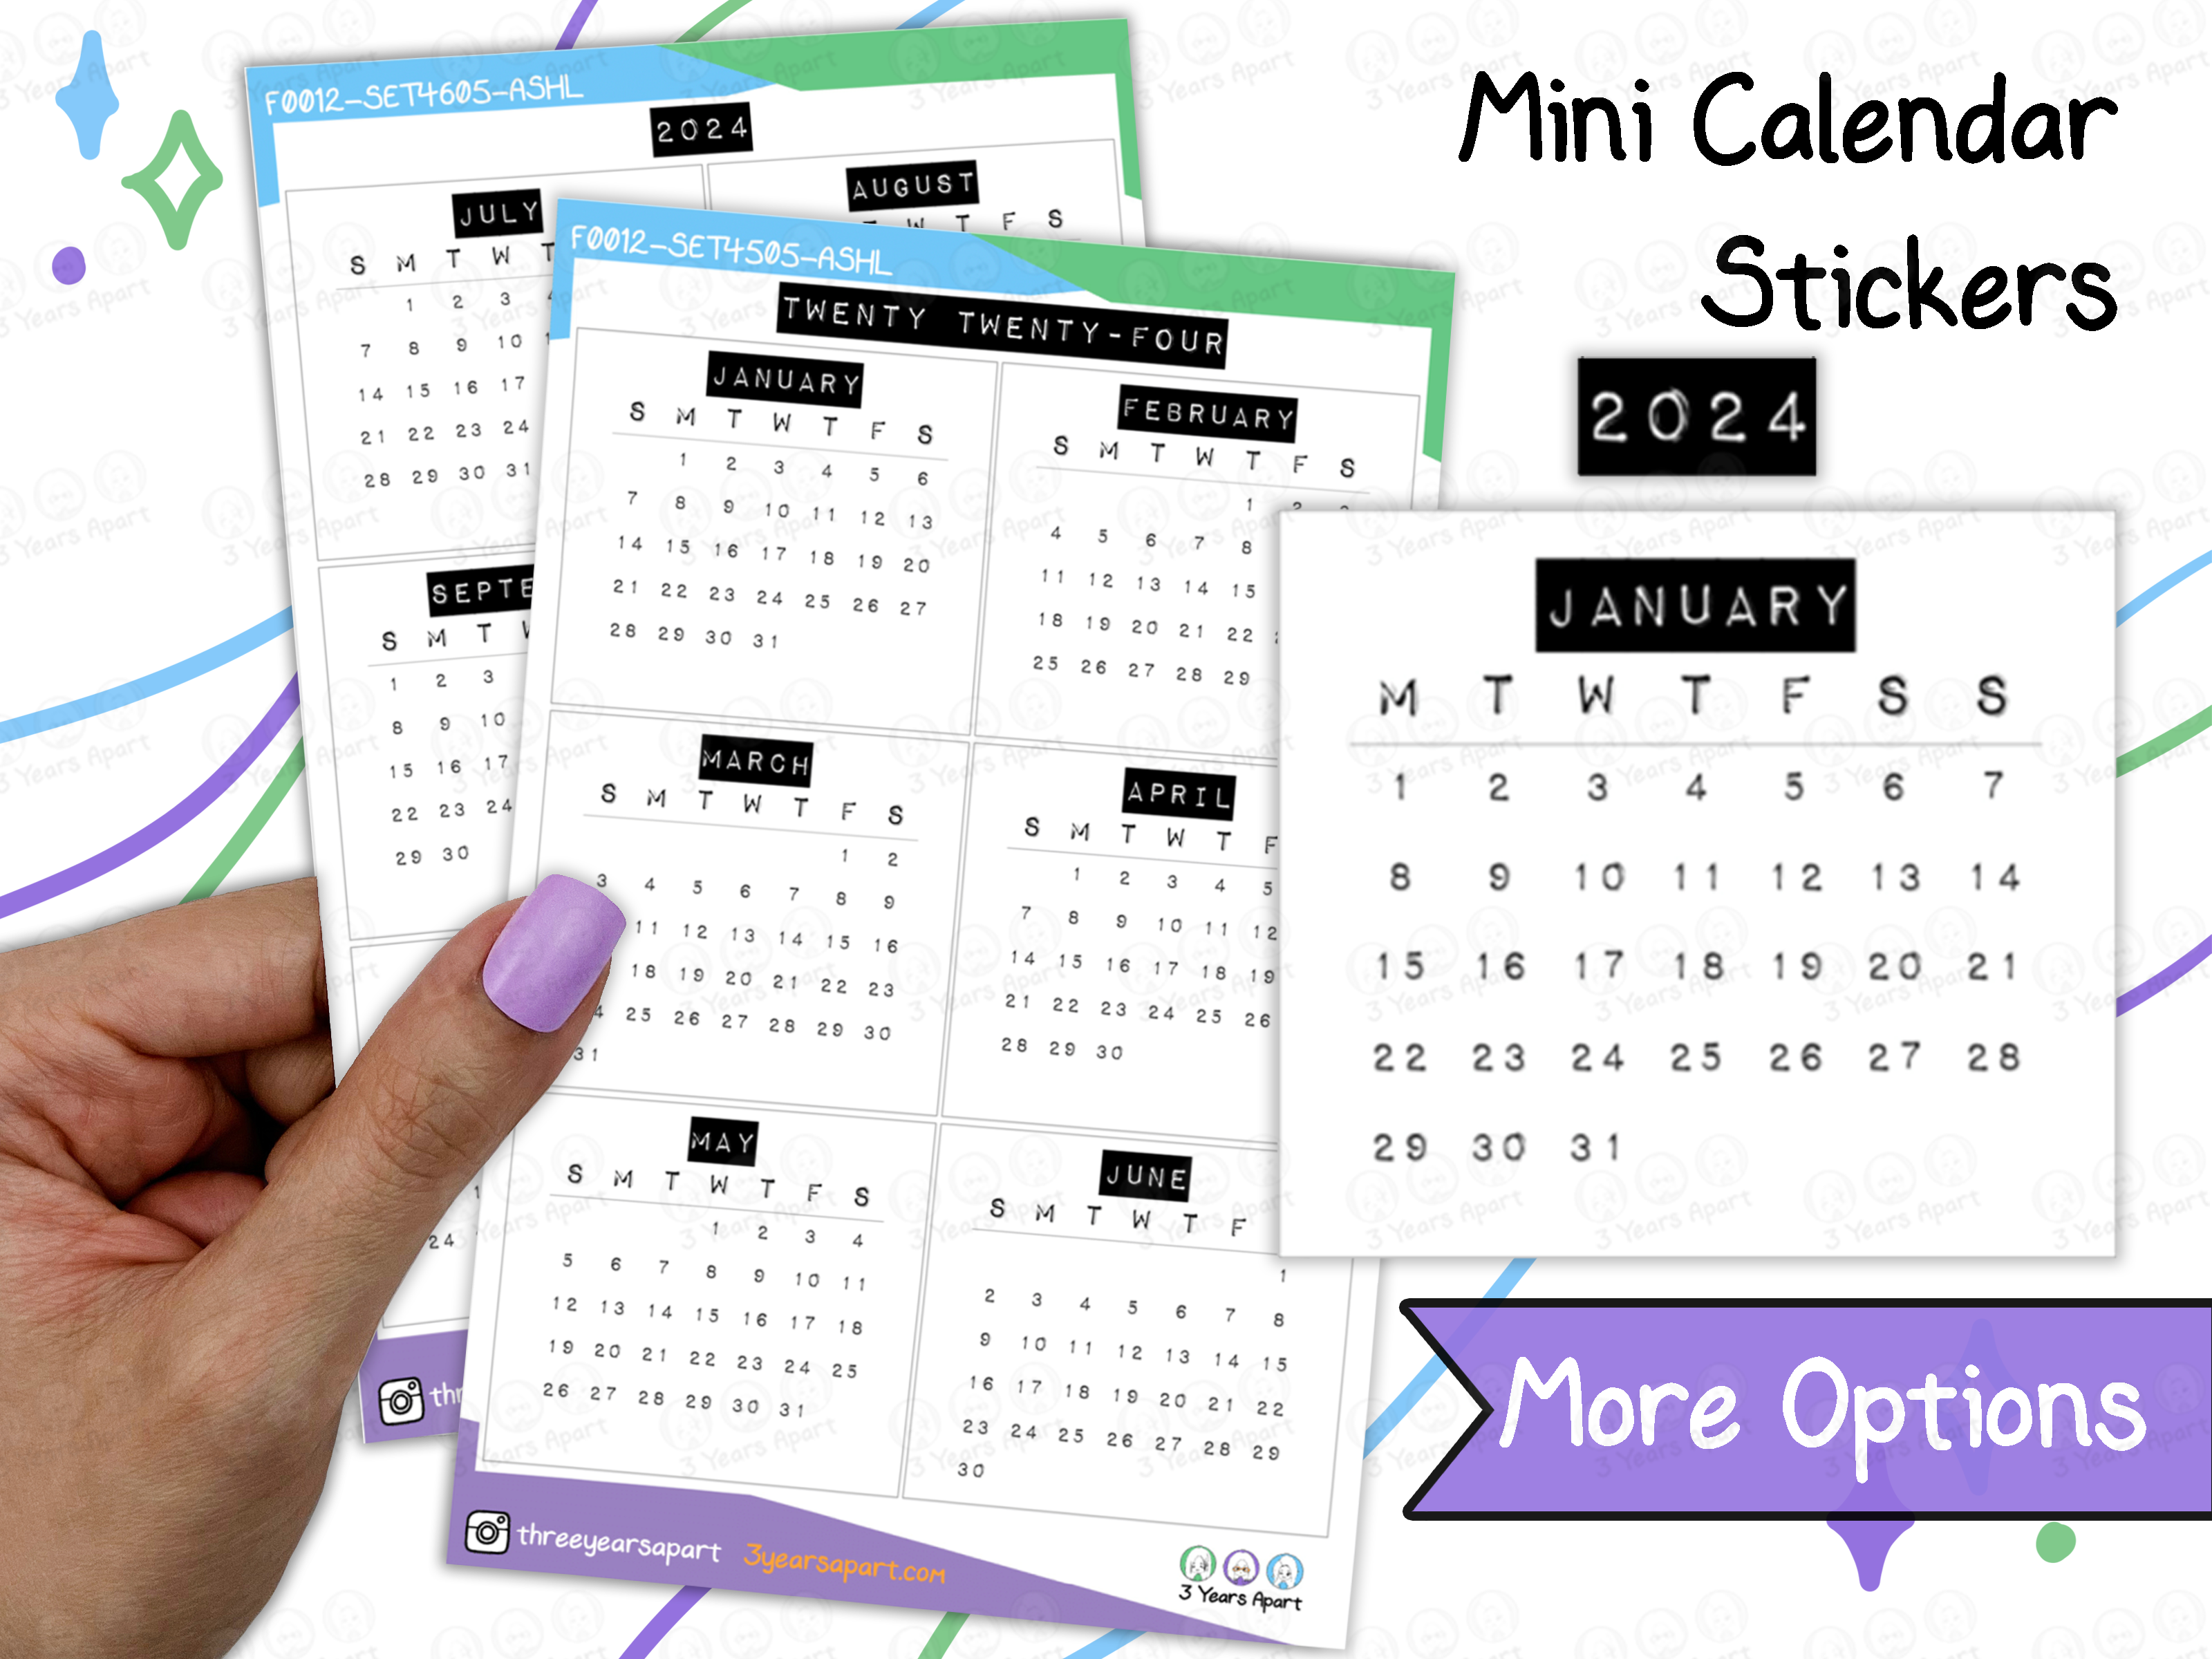 2024 Calendar Free Printable, Bullet Journal and Planner Free Download  Year-at-a-Glance & Future Log